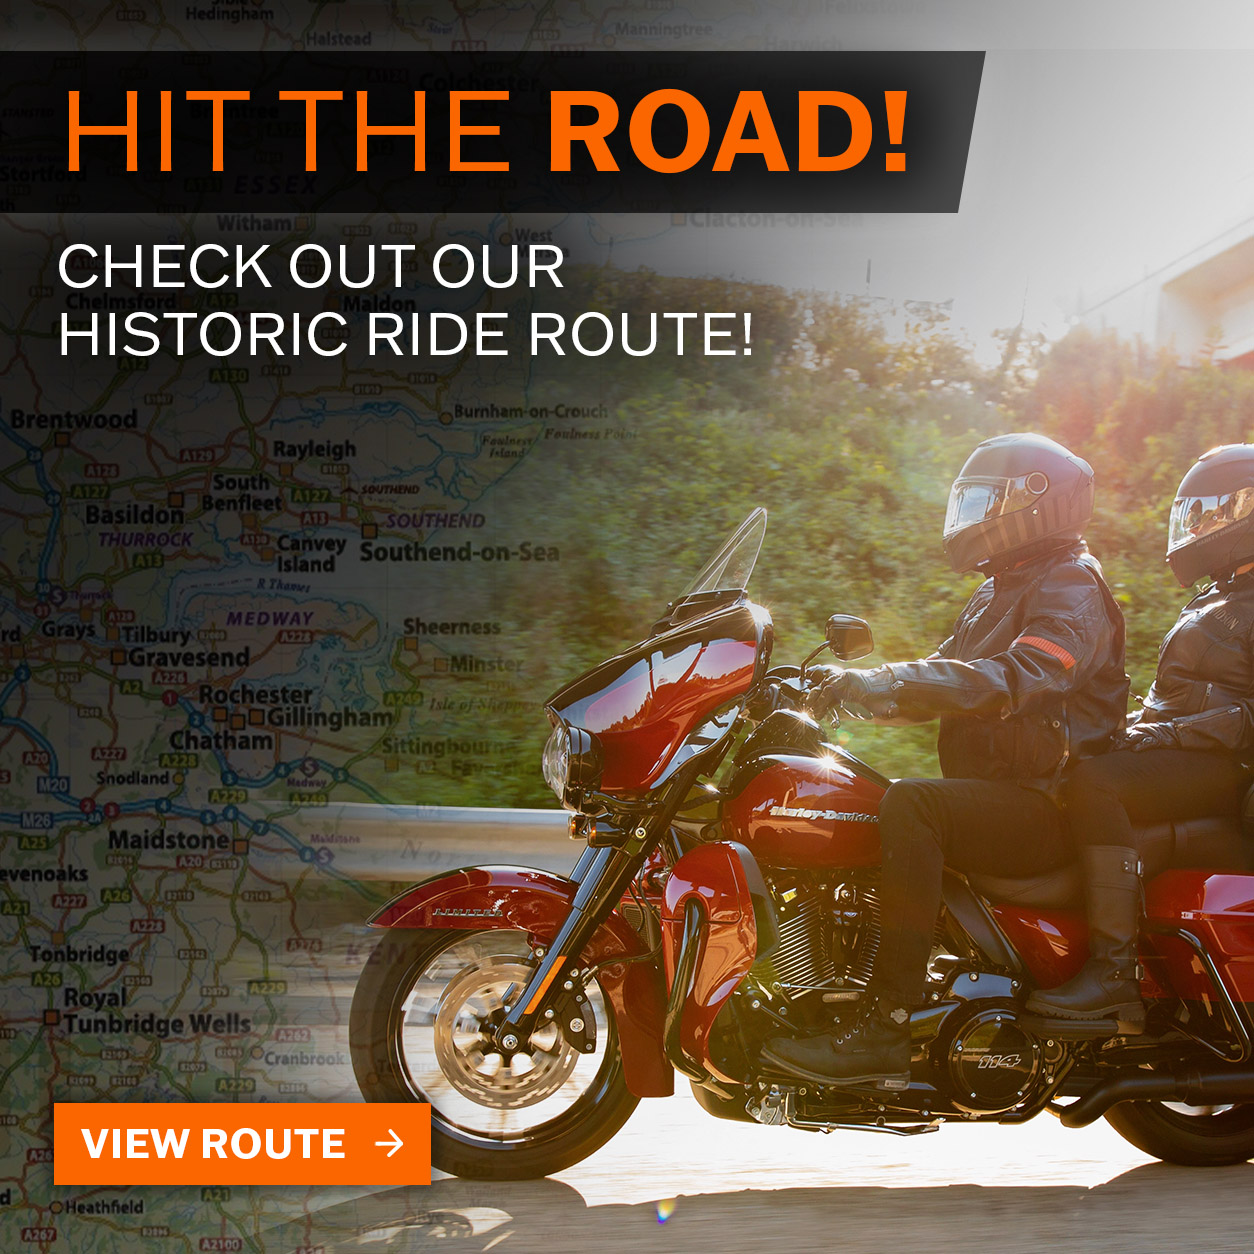 Maidstone Harley-Davidson Ride Route Recommendation